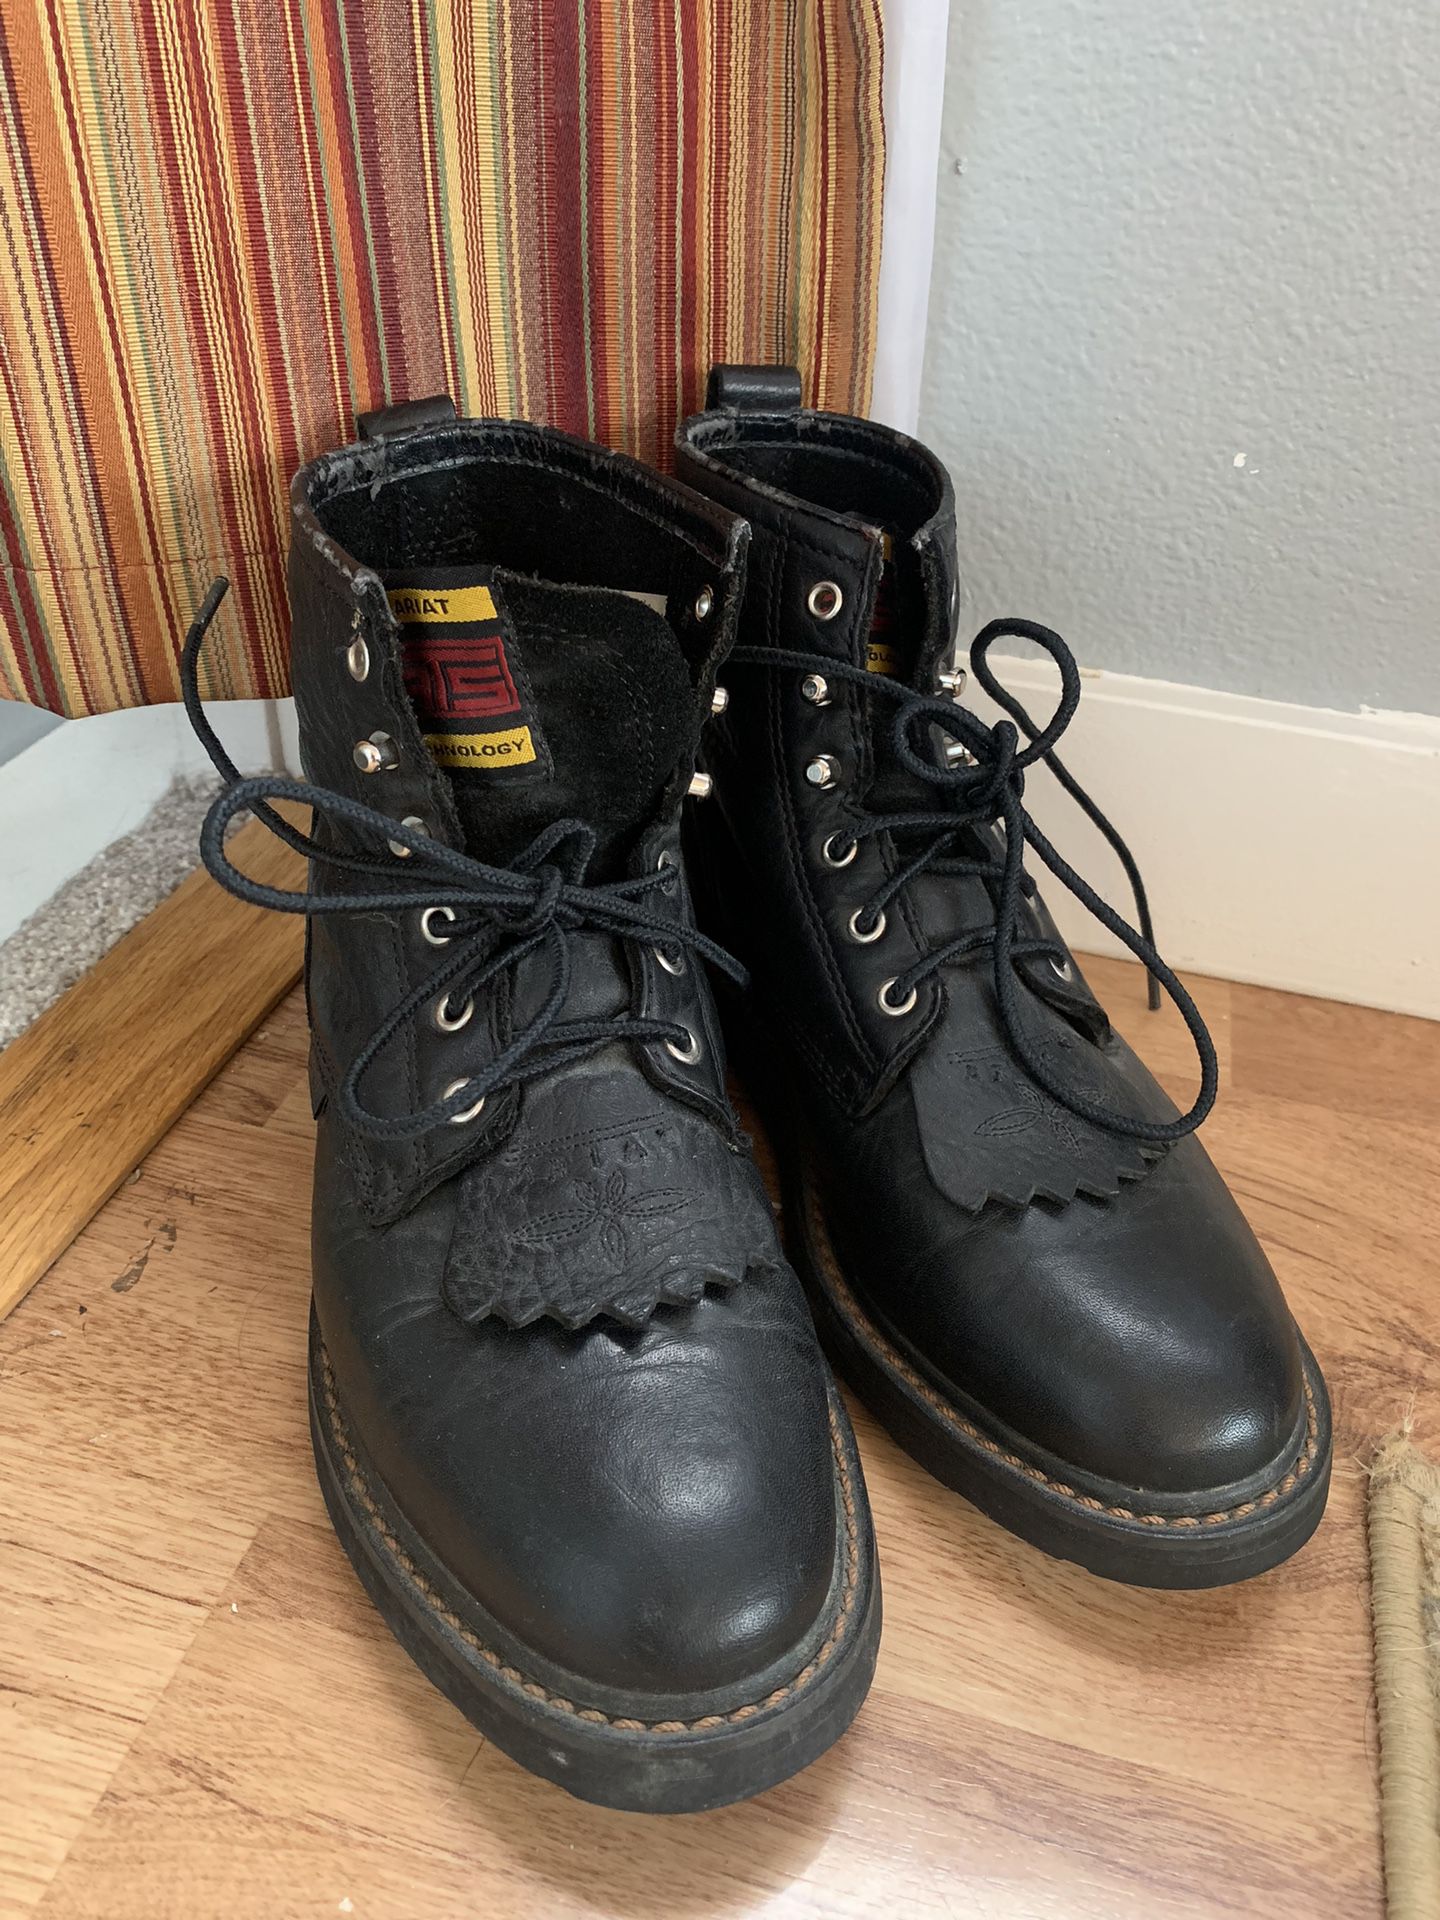 Black Leather ARIAT Heritage Lacer Kiltie Boots for Sale in Seattle, WA ...